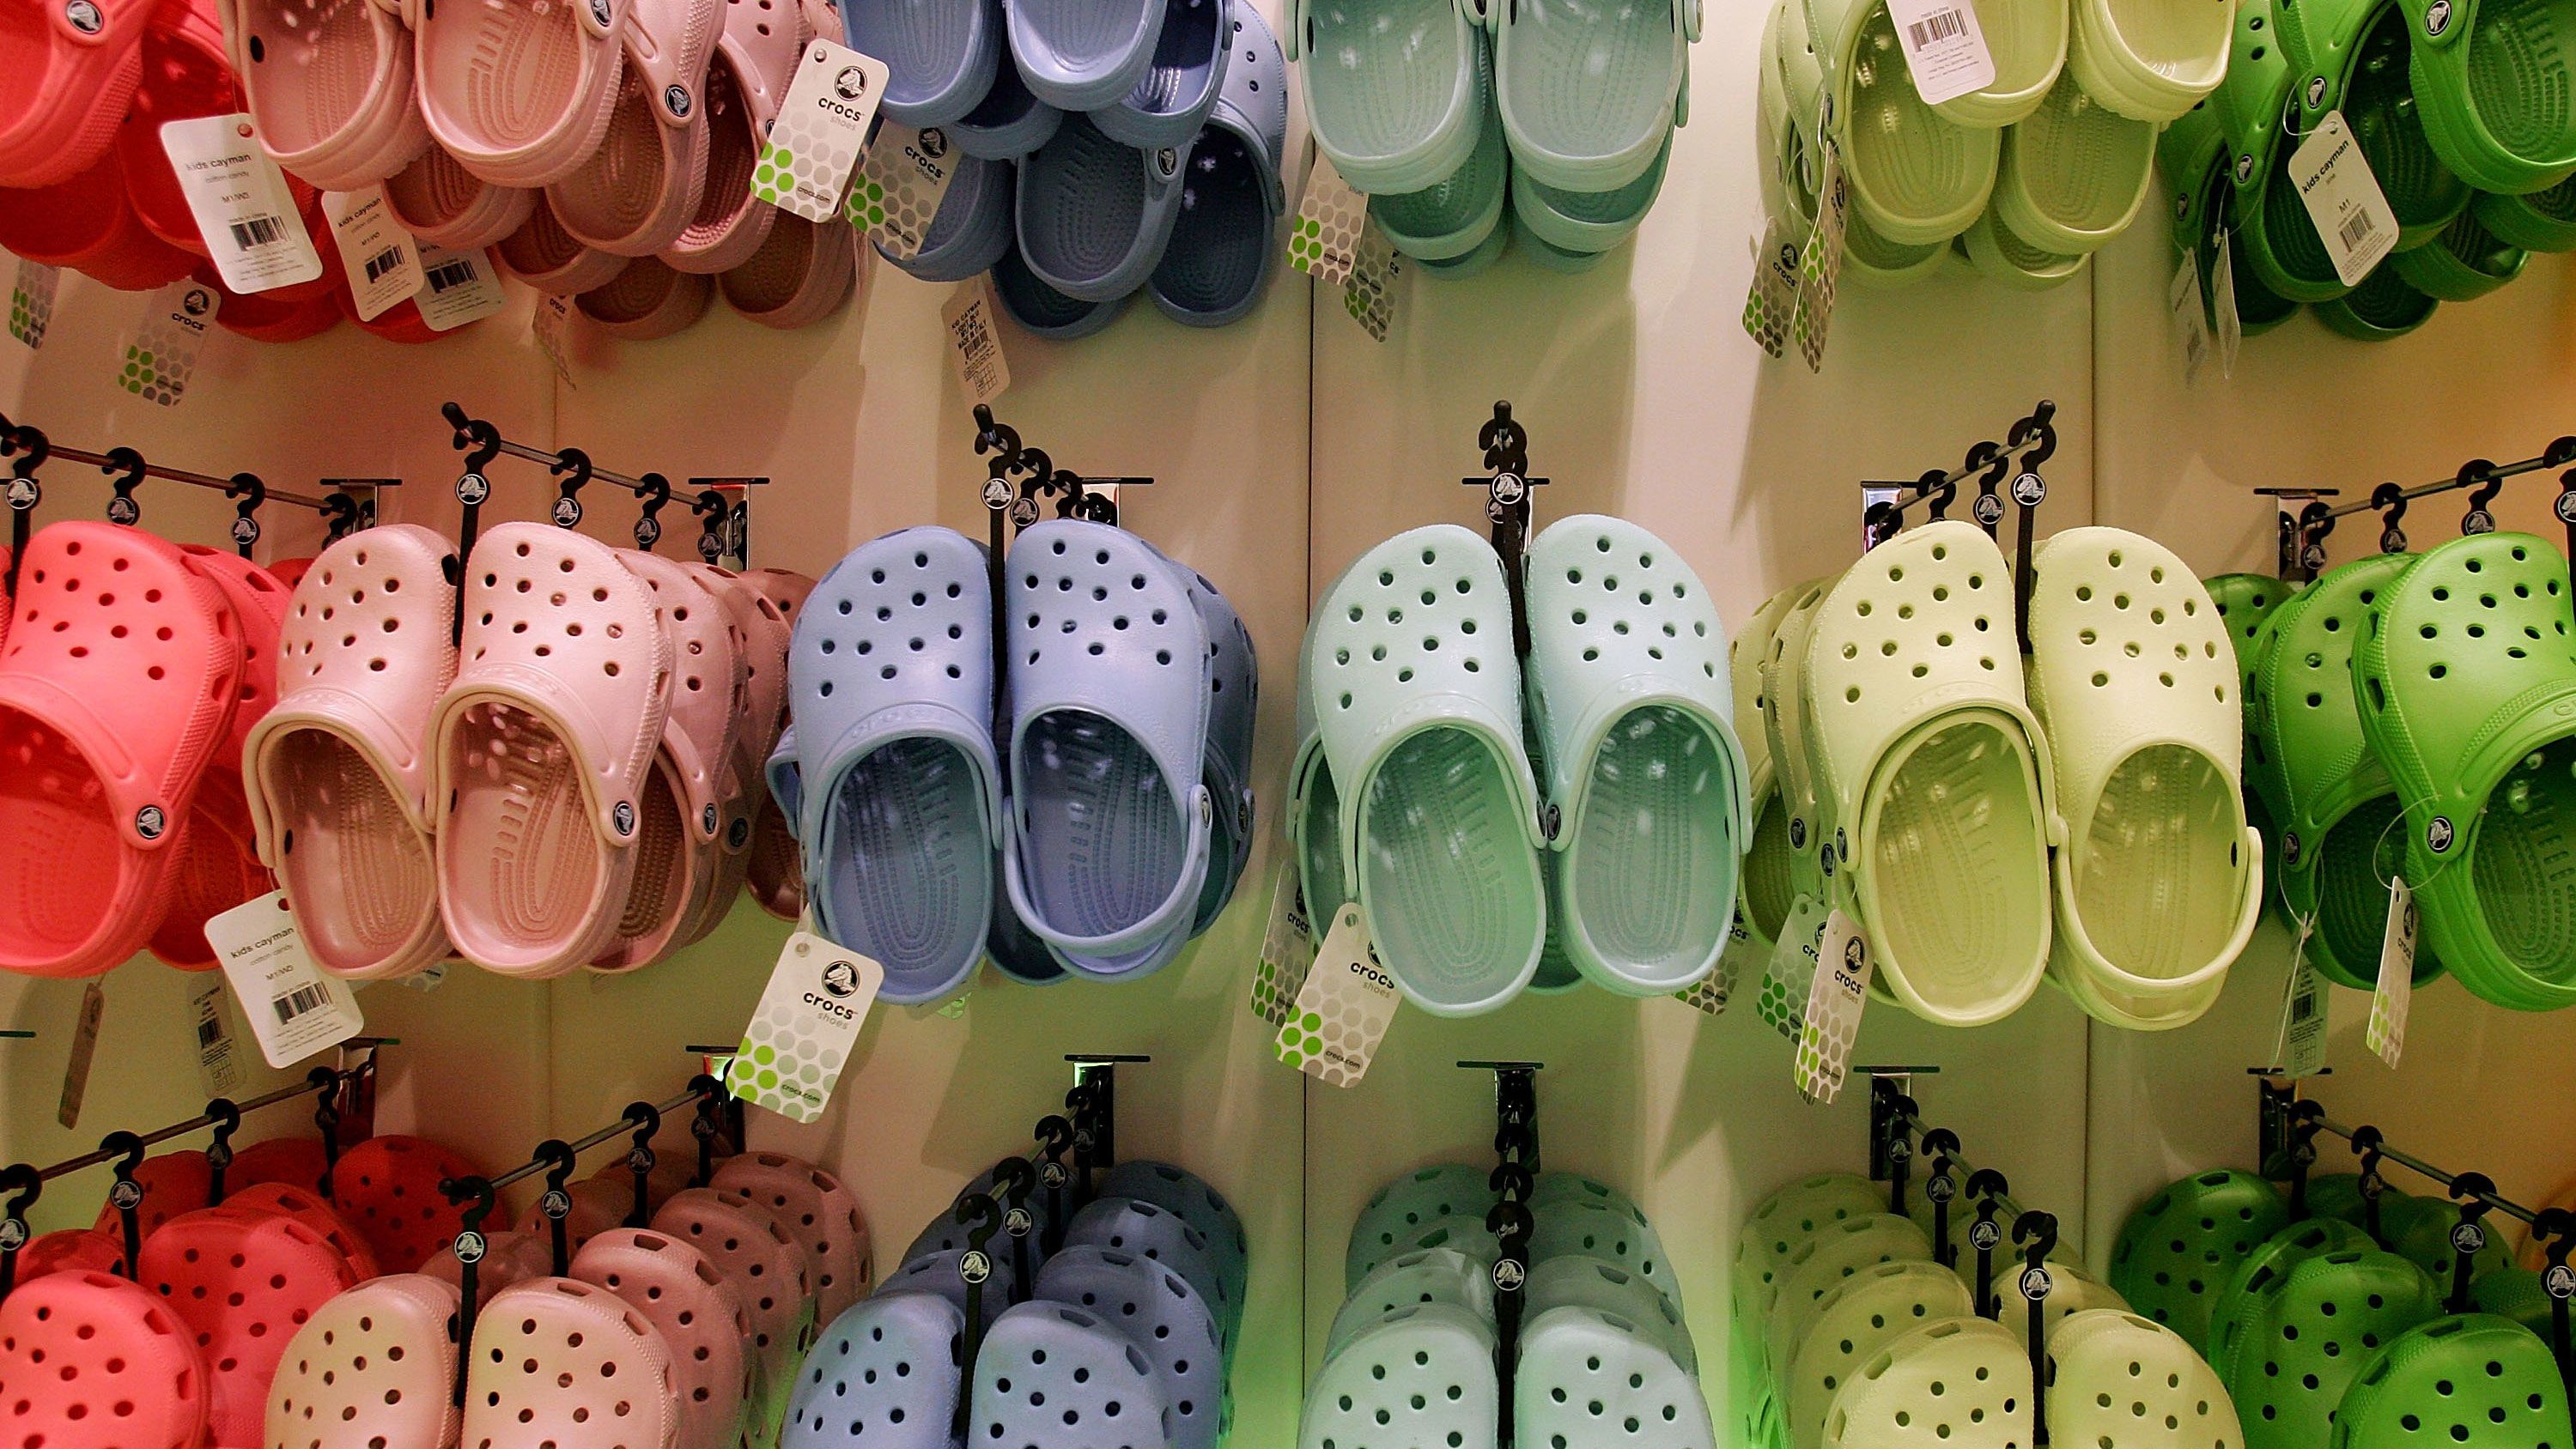 Crocs donating its shoes to healthcare workers | CNN Business